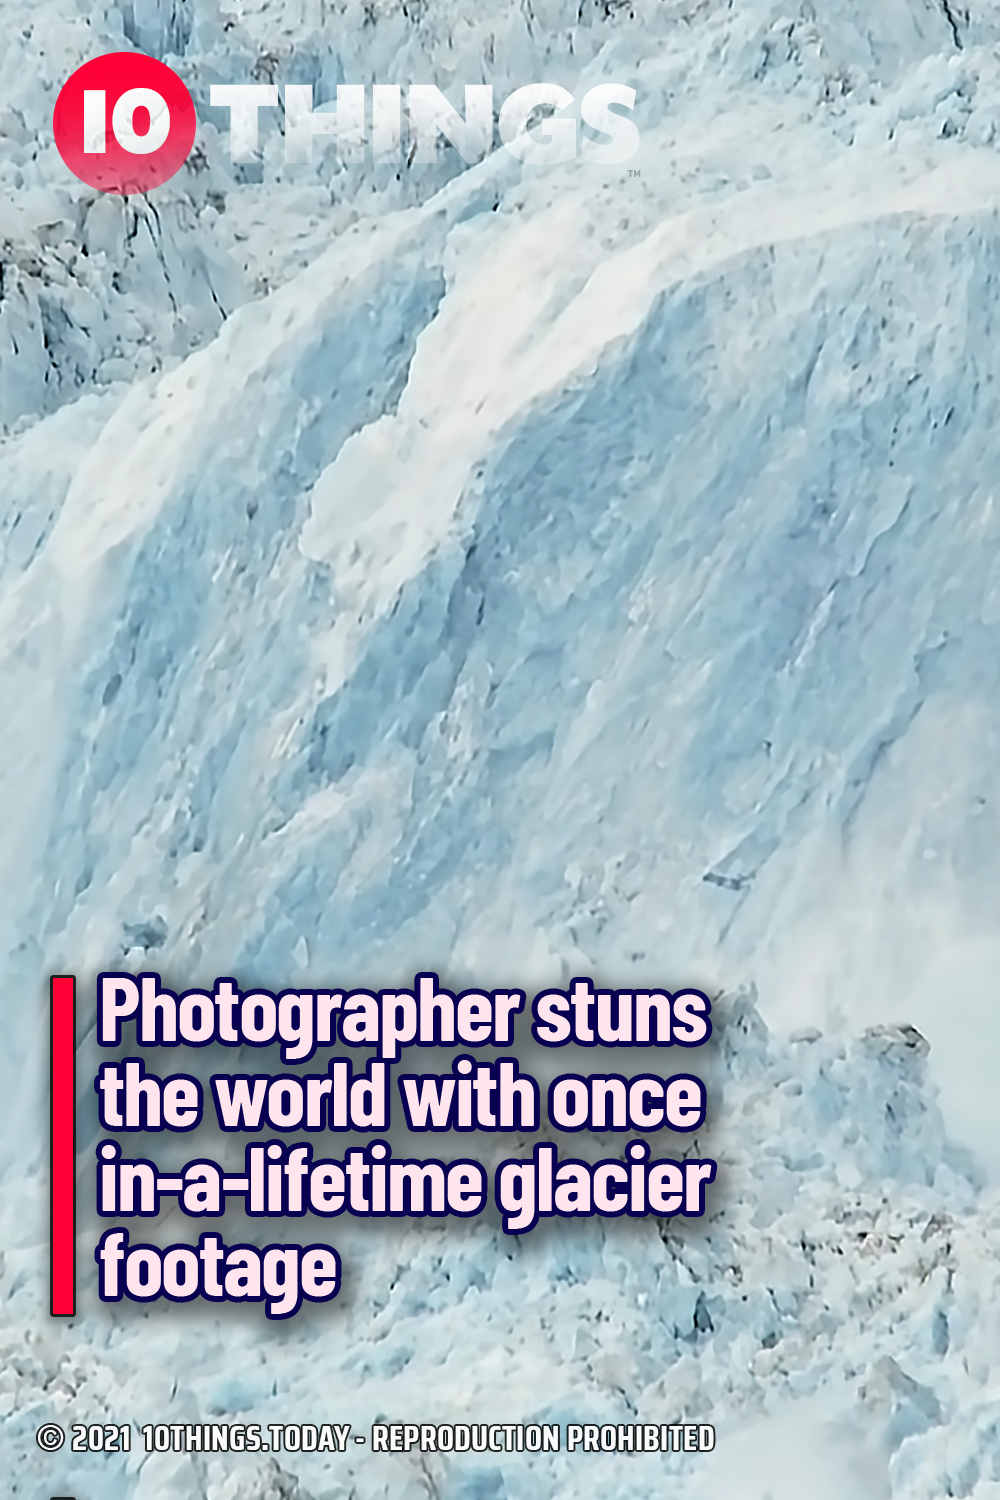 Photographer stuns the world with once in-a-lifetime glacier footage